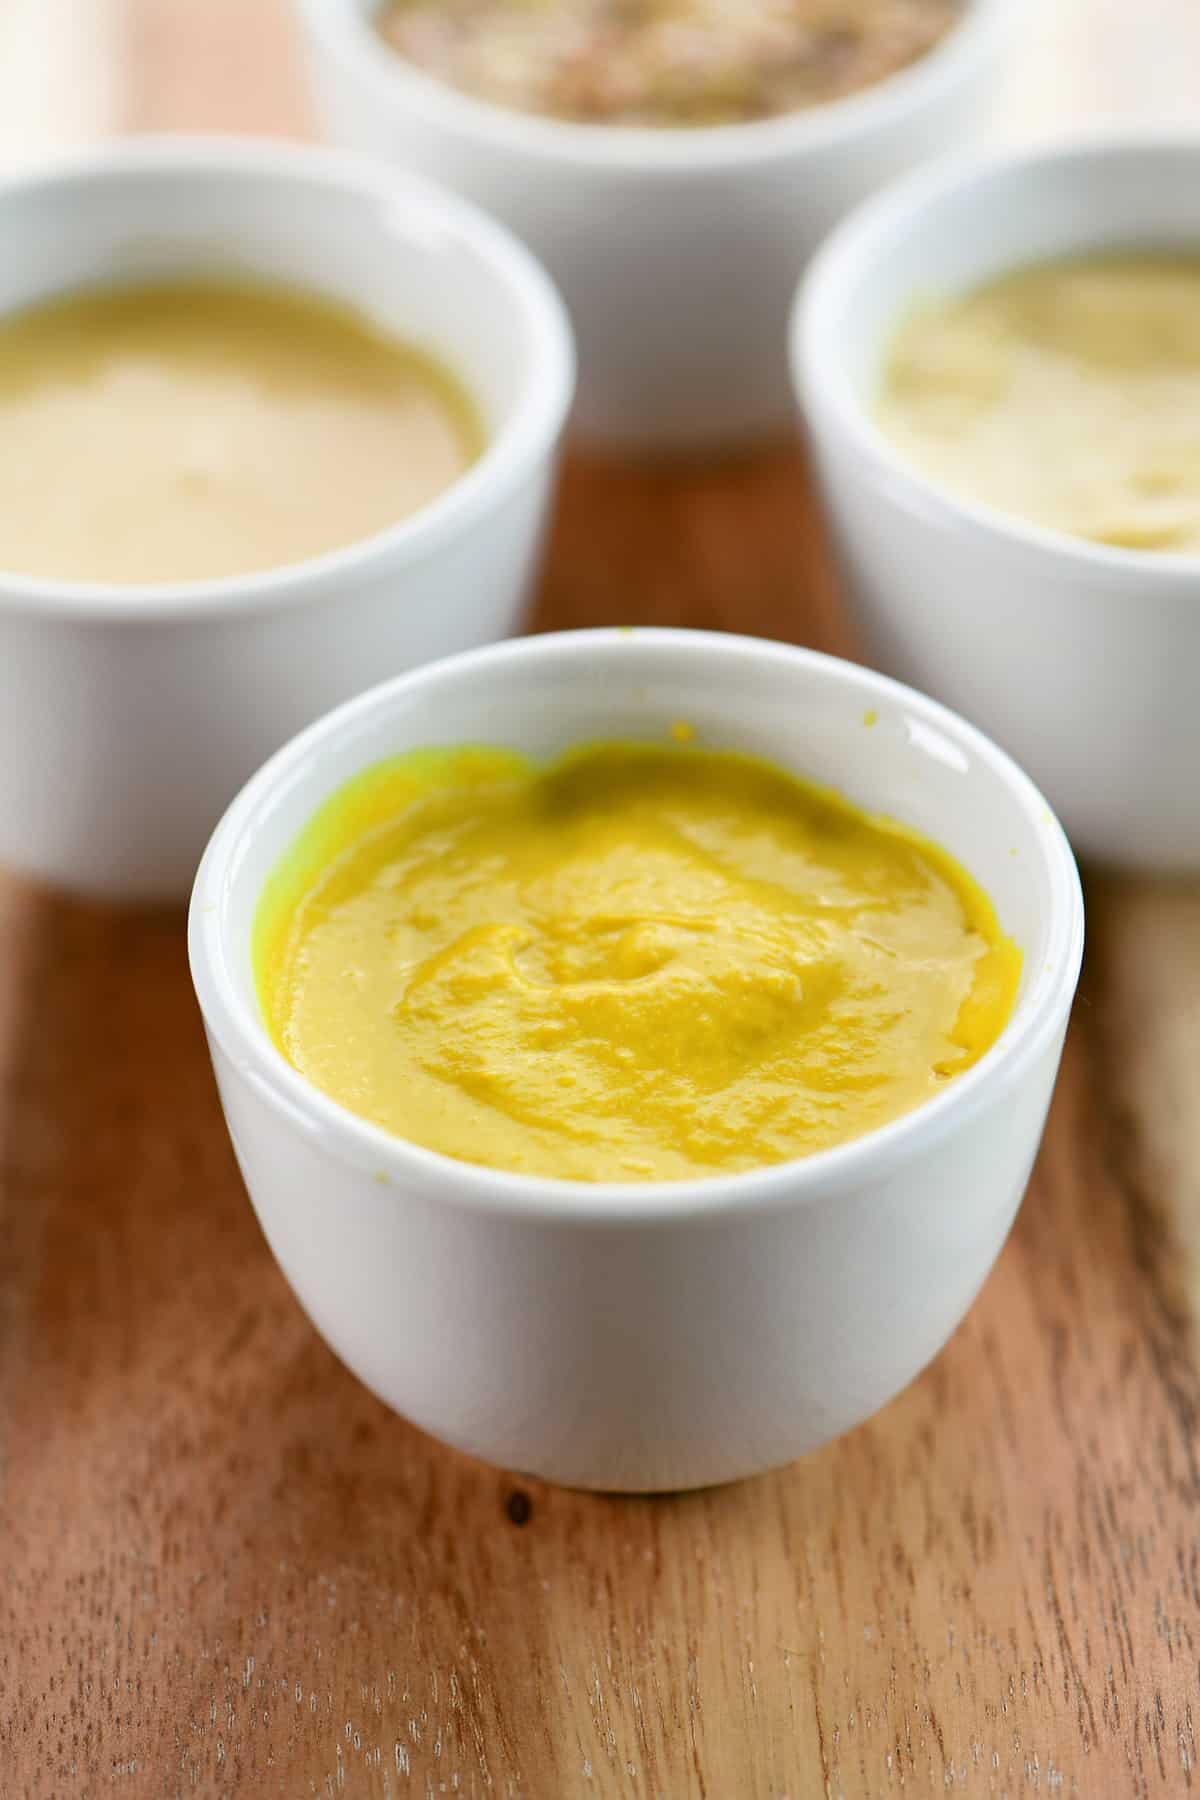 Yellow mustard in a small white condiment bowl.